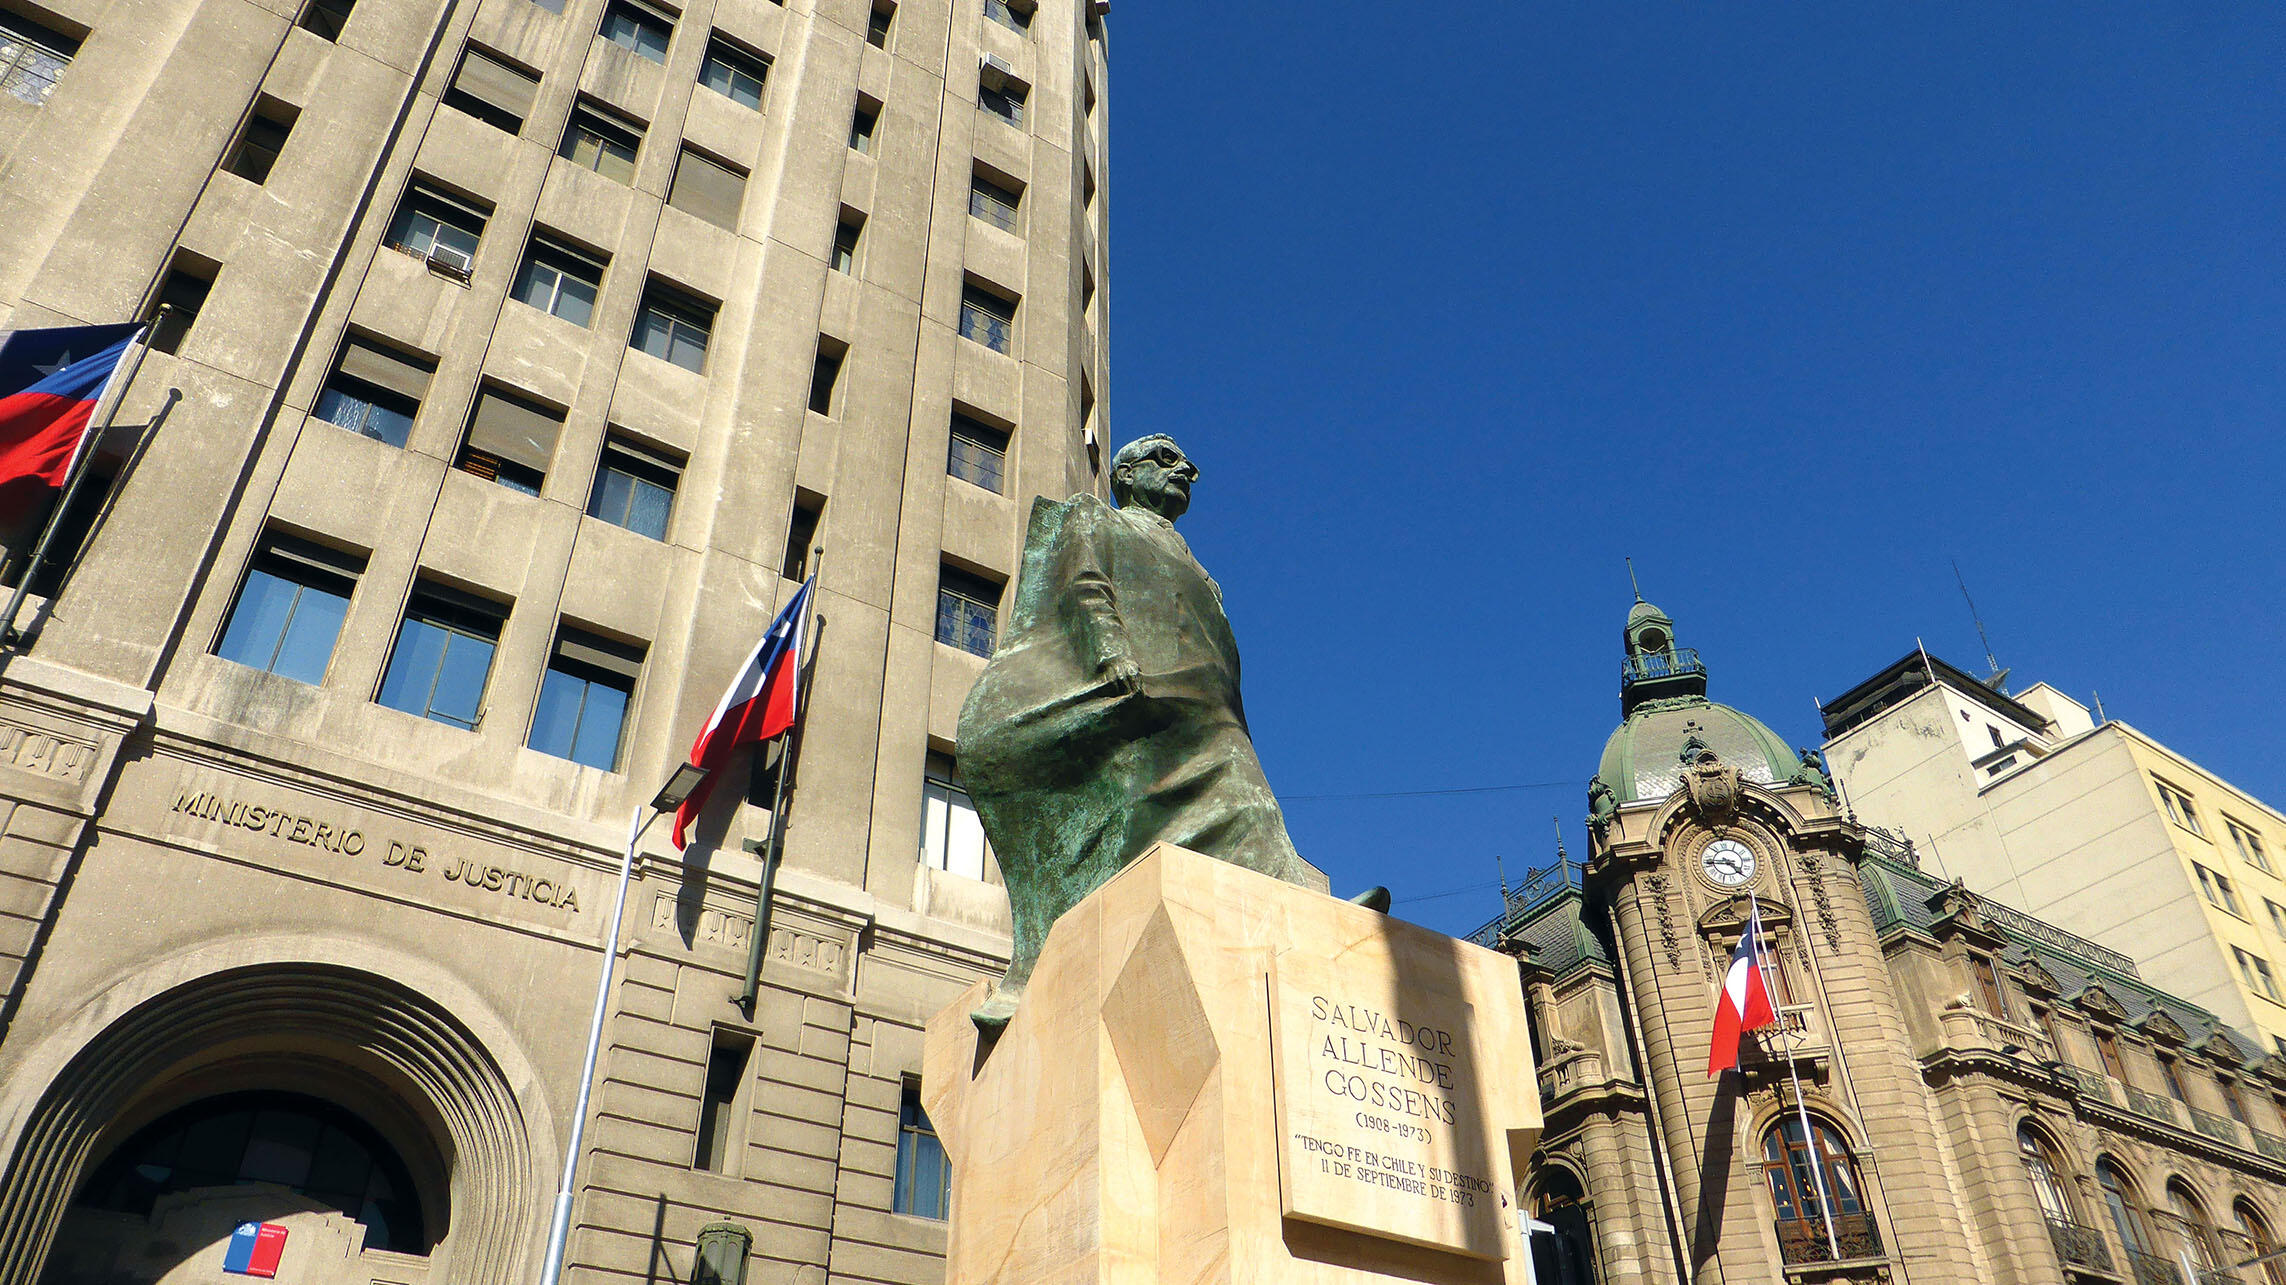 A statue of Salvador Allende outside Chile’s Ministry of Justice in Santiago in 2014. (Photo by Fernando Valido.)